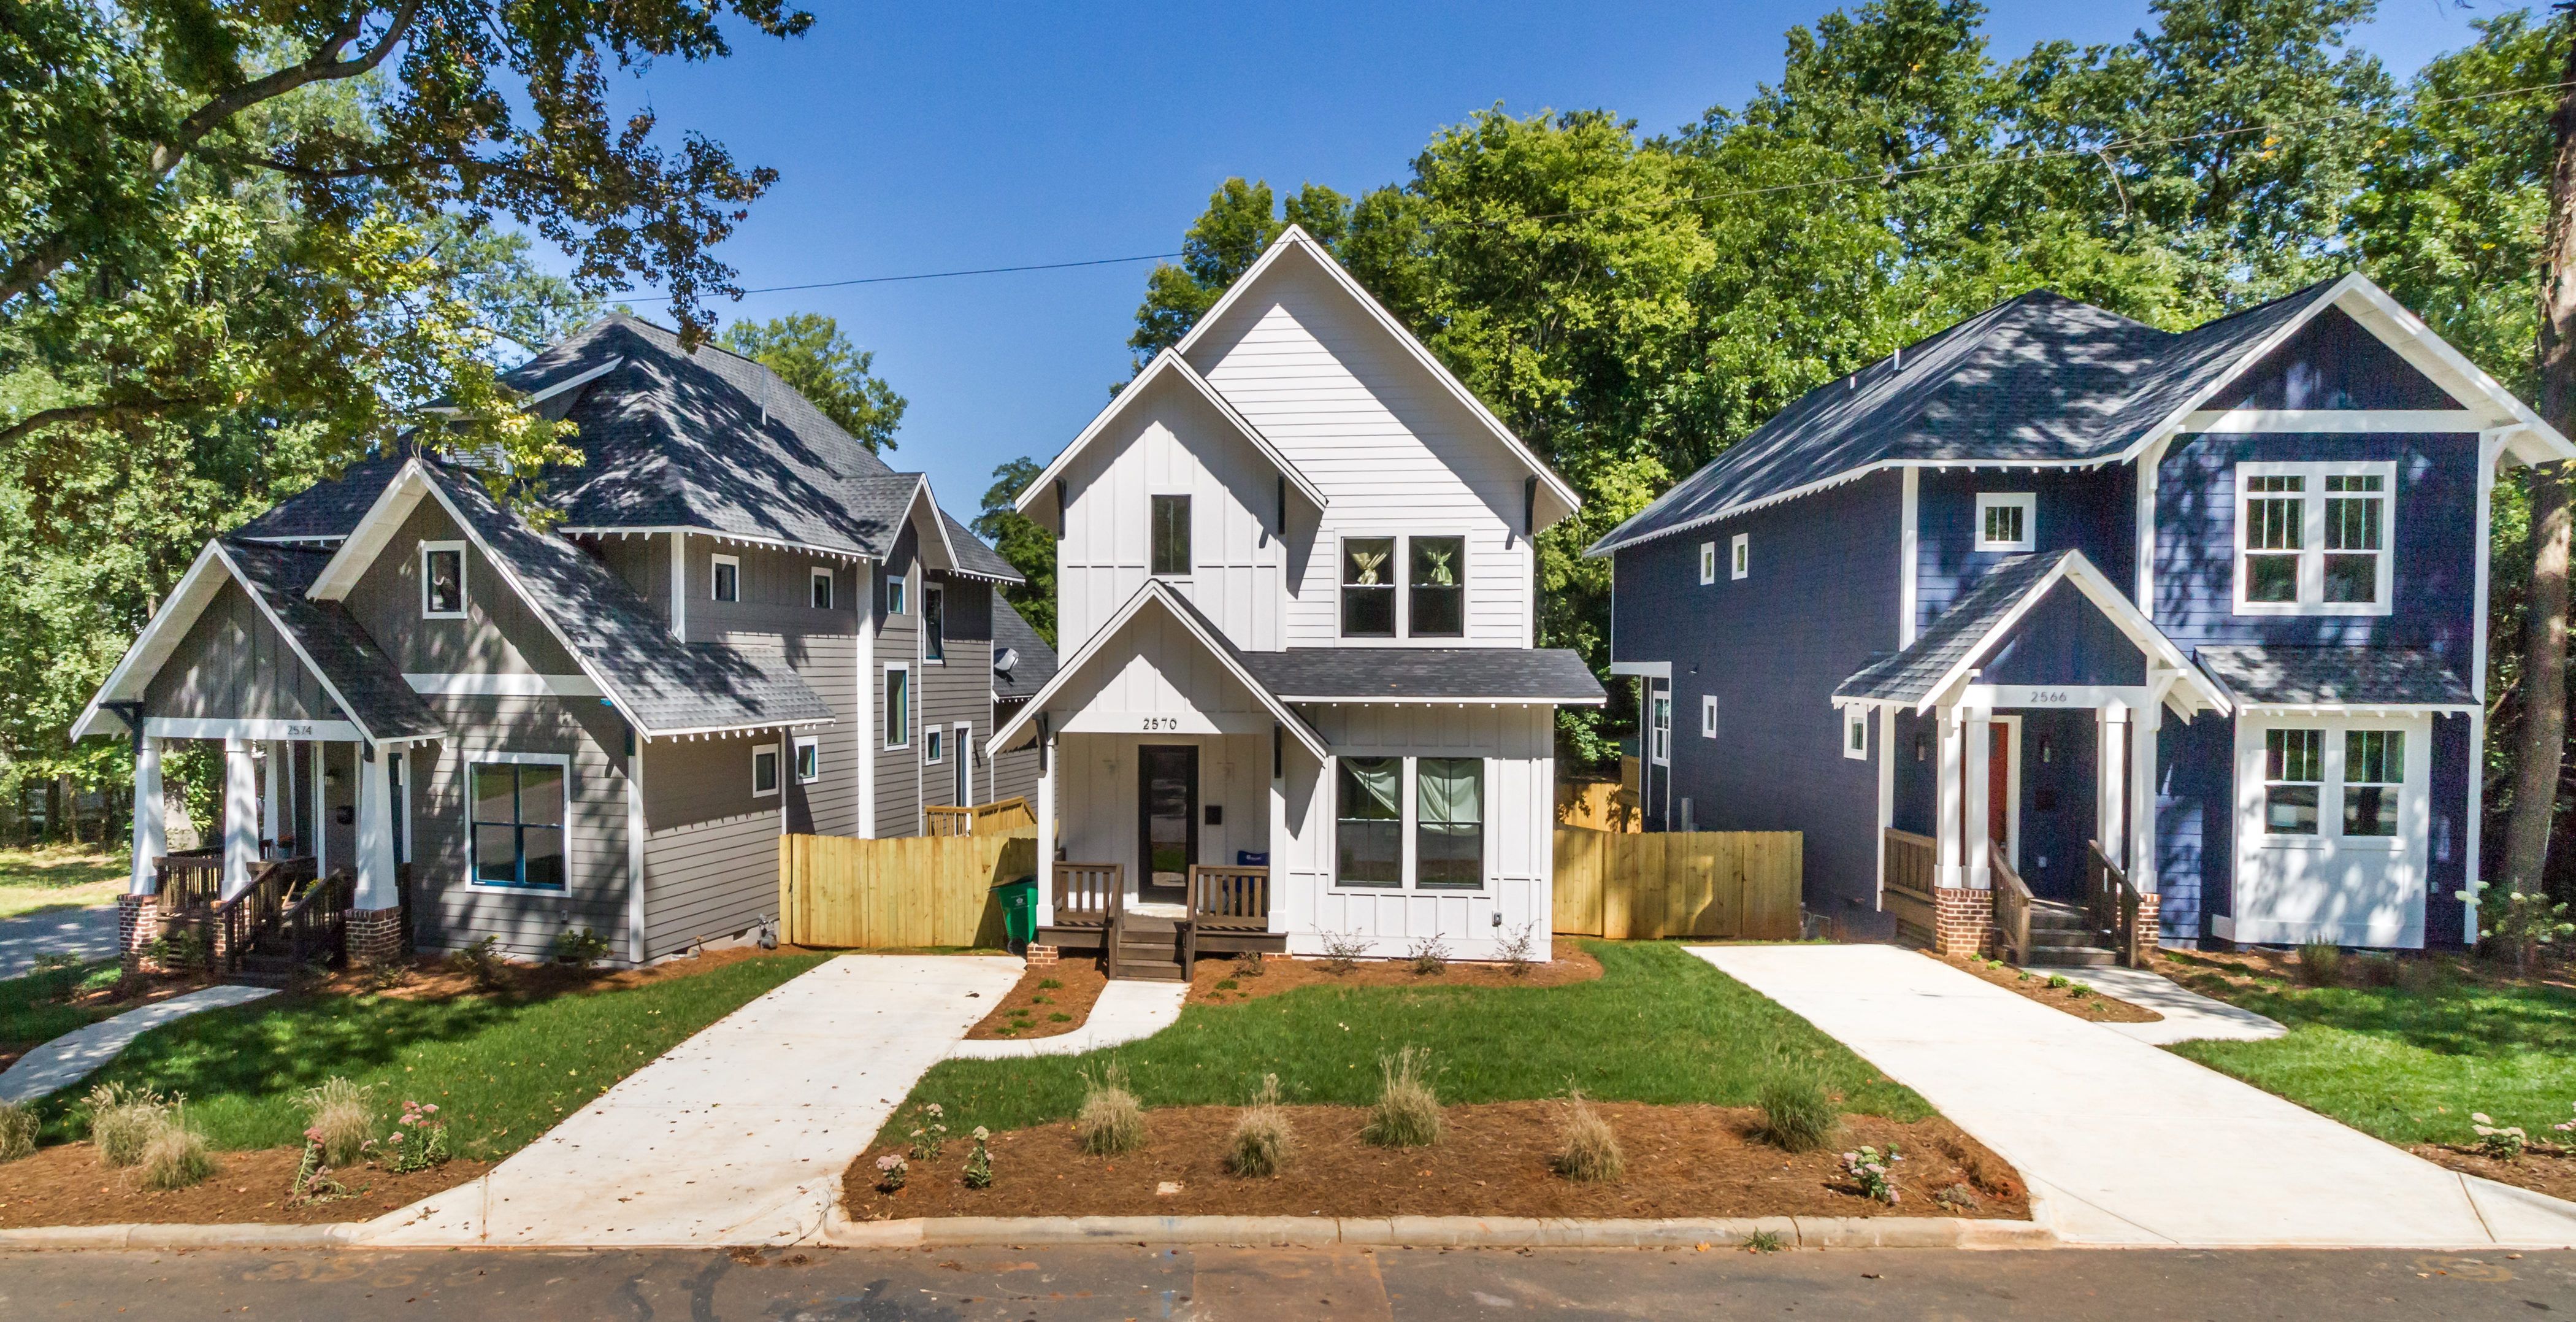 Three new homes in Charlotte, NC